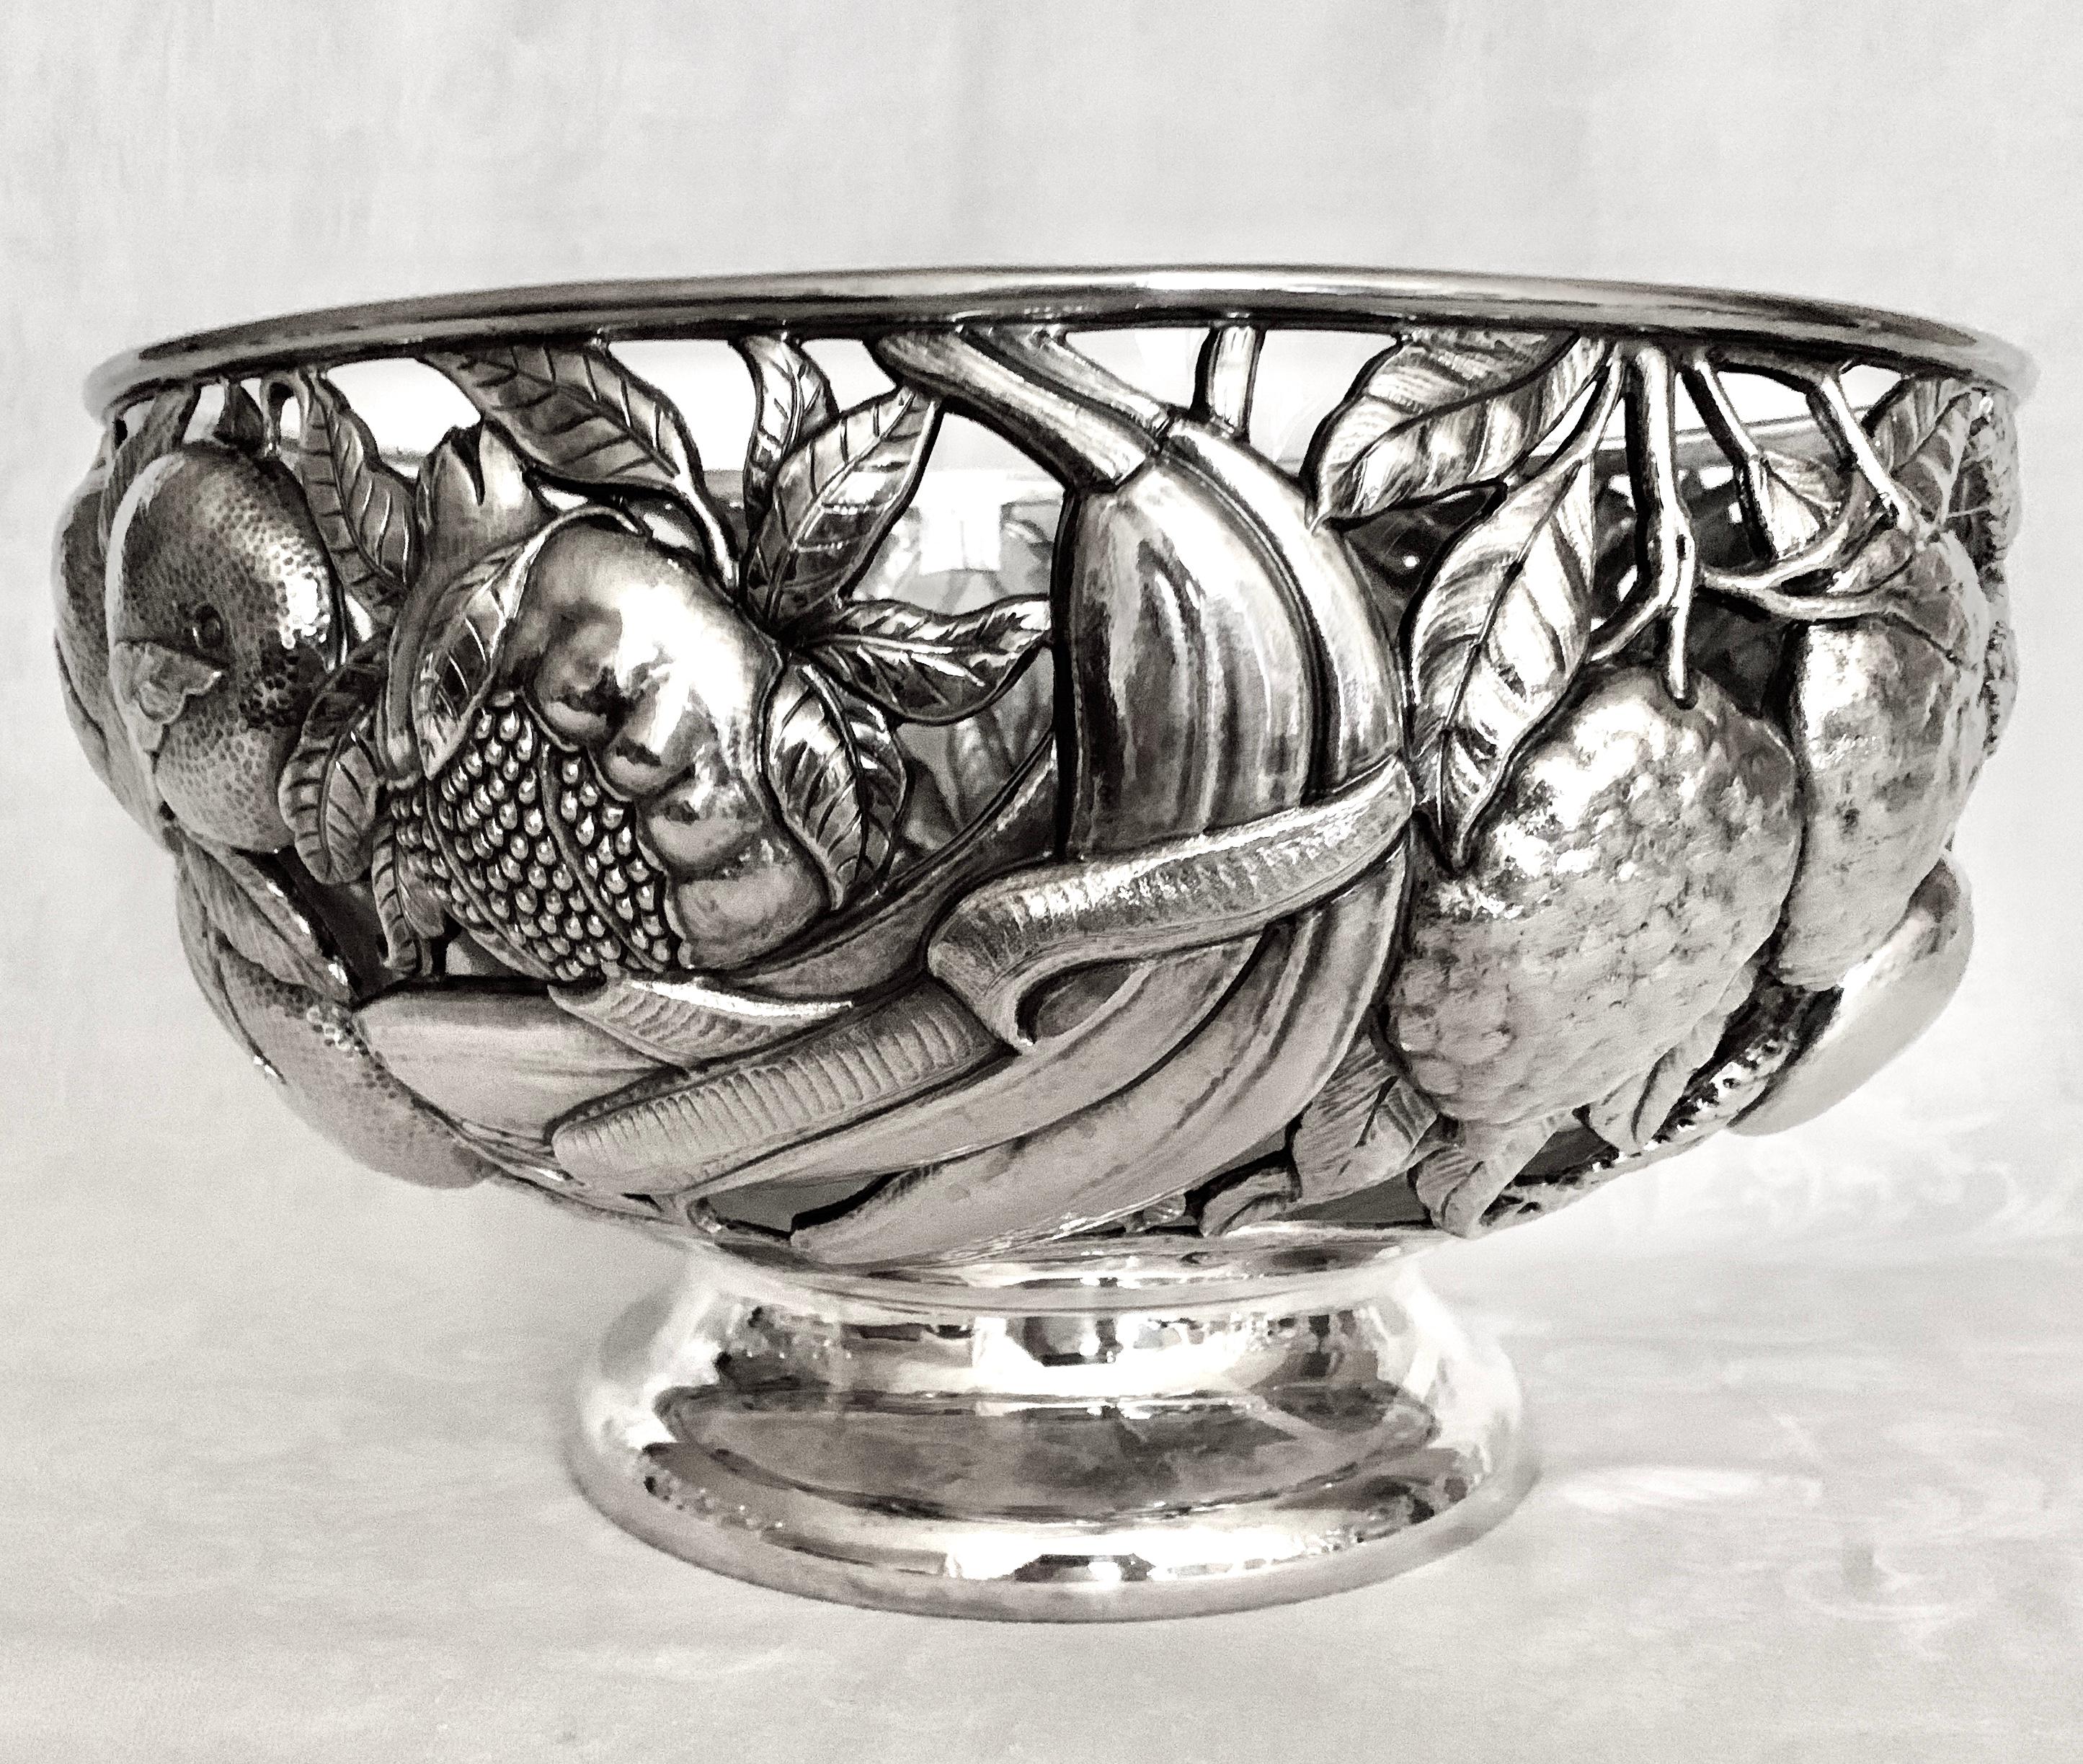 Fratelli Cacchione Immense Sterling Silver Centerpiece Bowl, Milan, Italy, 1960s For Sale 2